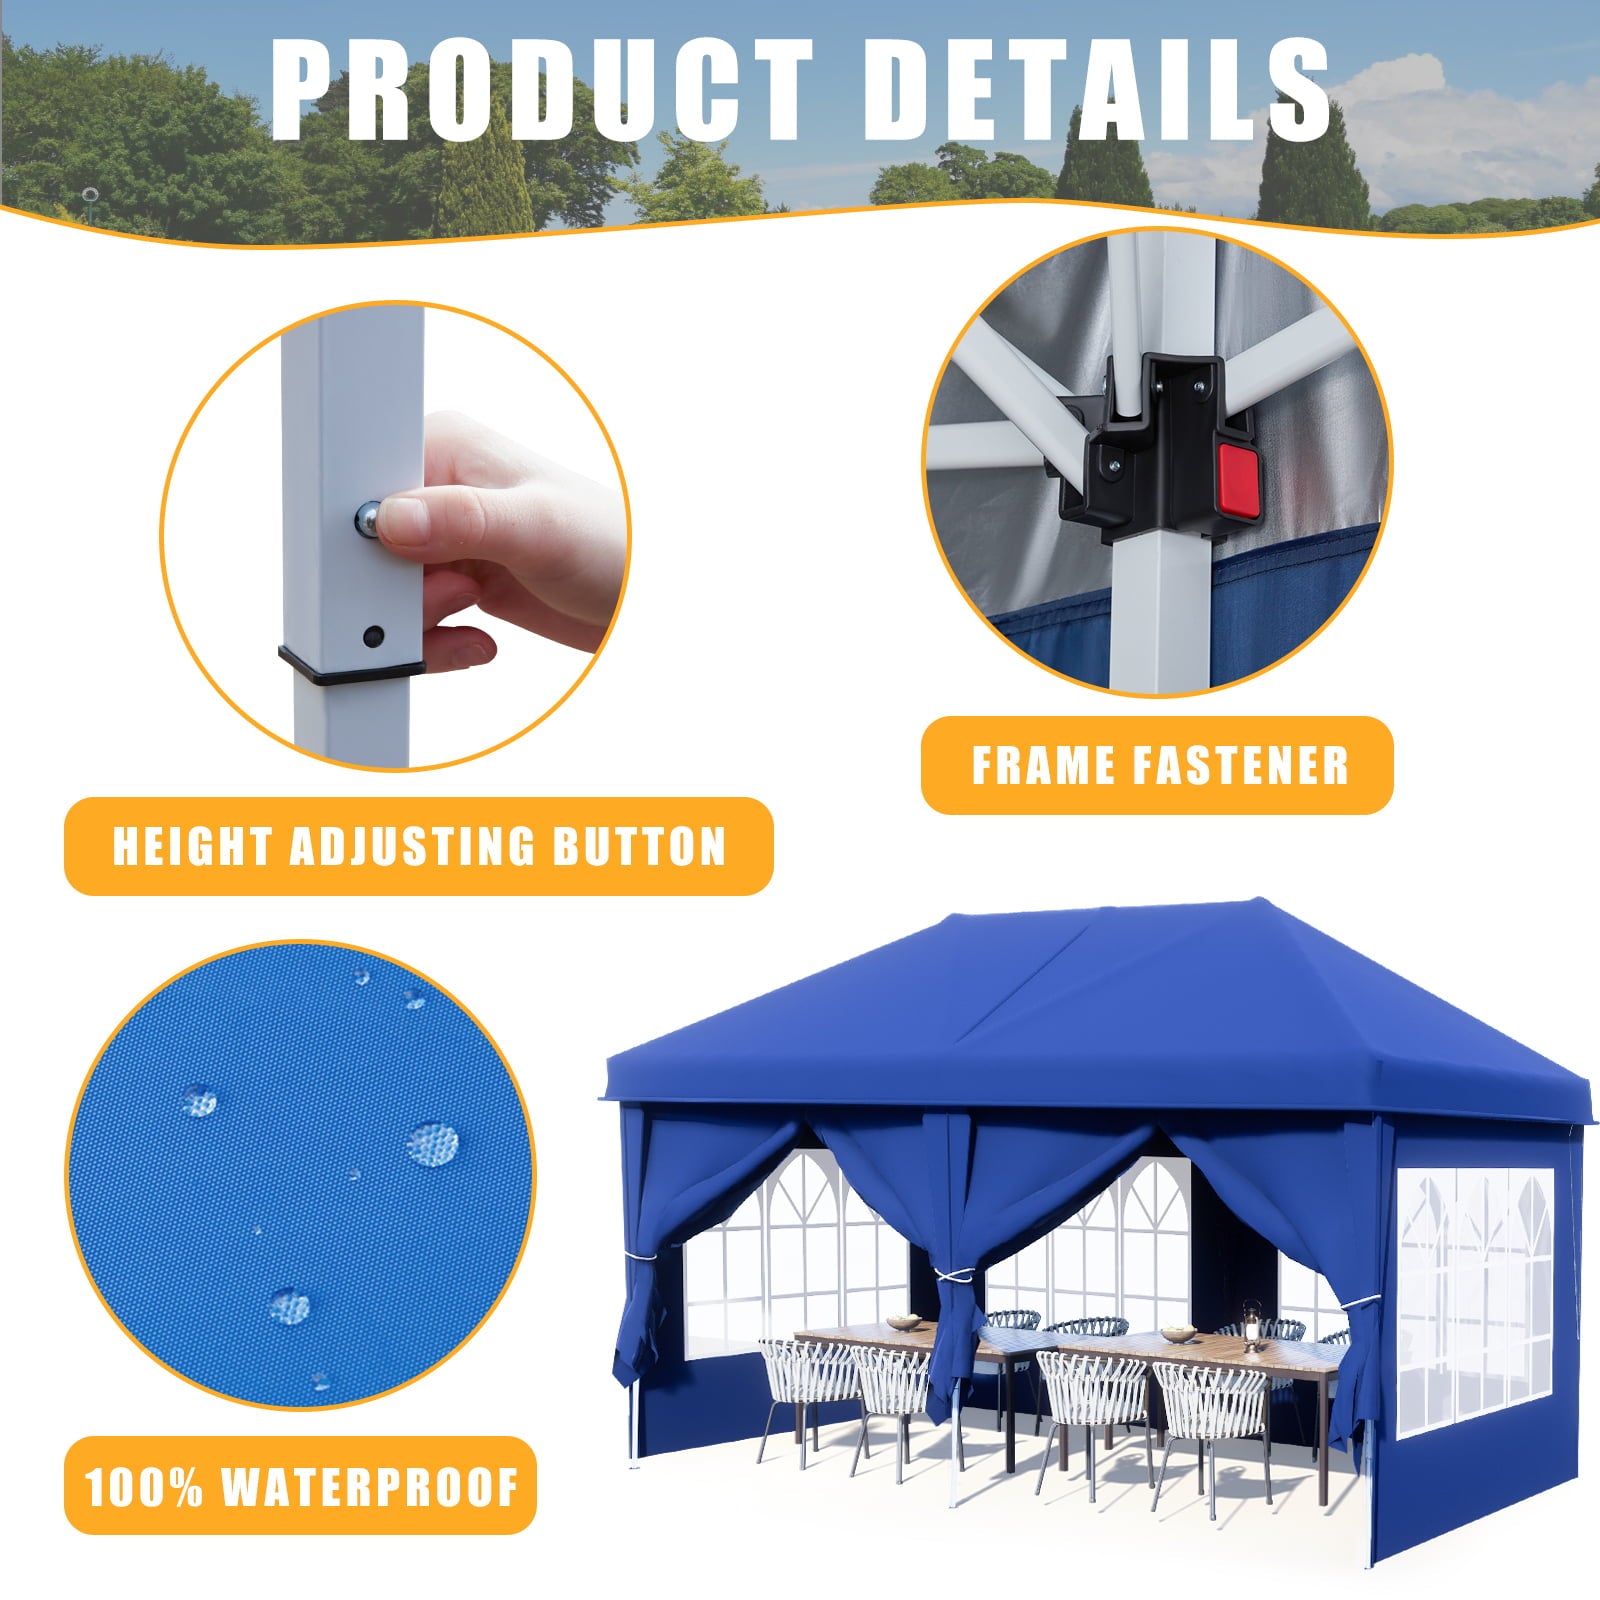 AVAWING 10 x 20 Canopy Tent with Sidewalls, Folding Pop Up Canopies Height Adjustable, Anti-UV & Waterproof Outdoor Canopy Tent with Portable Carry Bag for Parties, Patio, Commercial